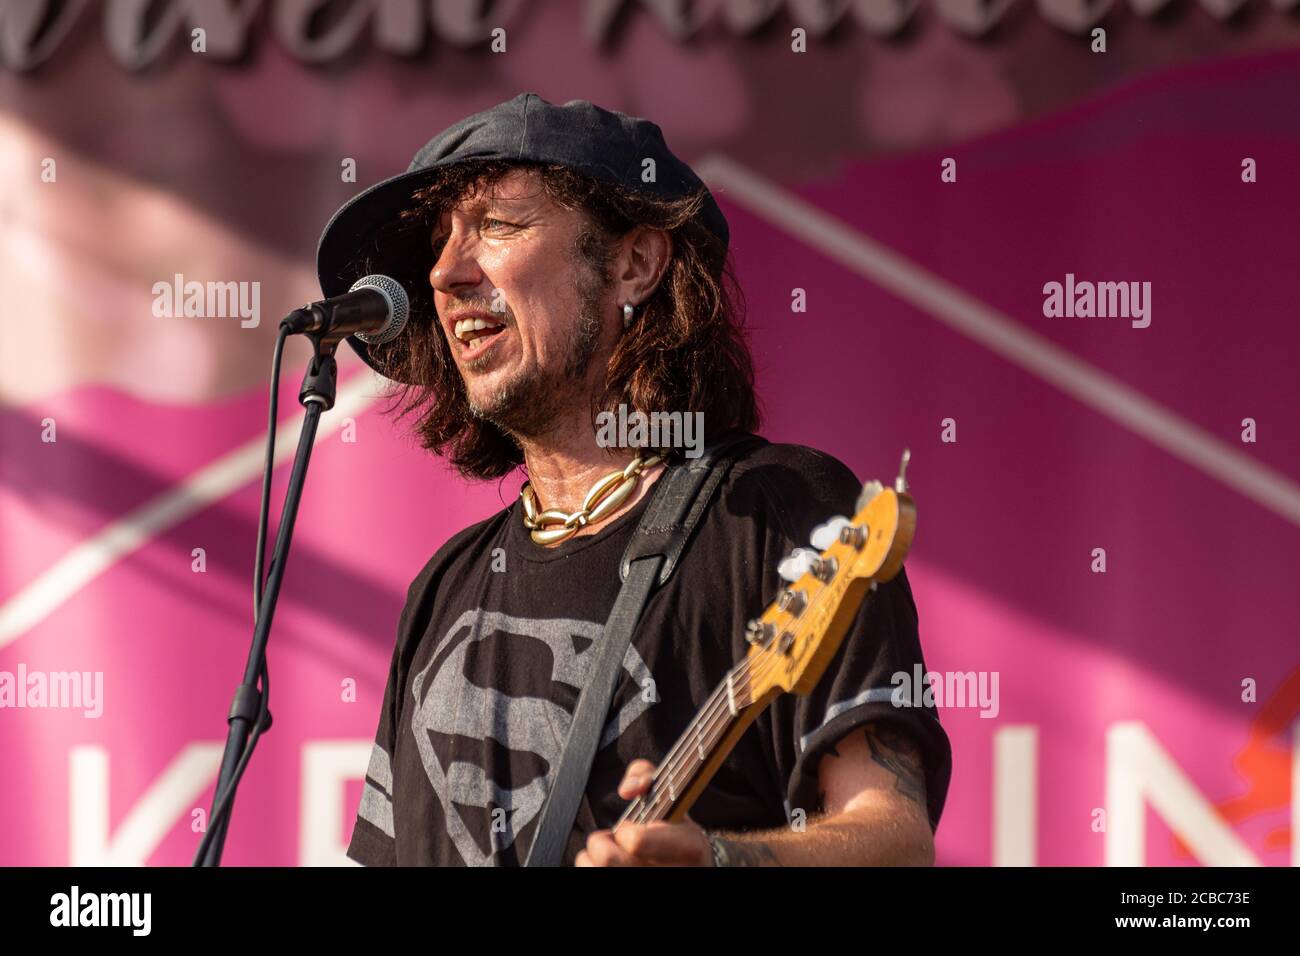 Sami Yaffa on stage at Krapin Paja open-air concert in Tuusula, Finland Stock Photo